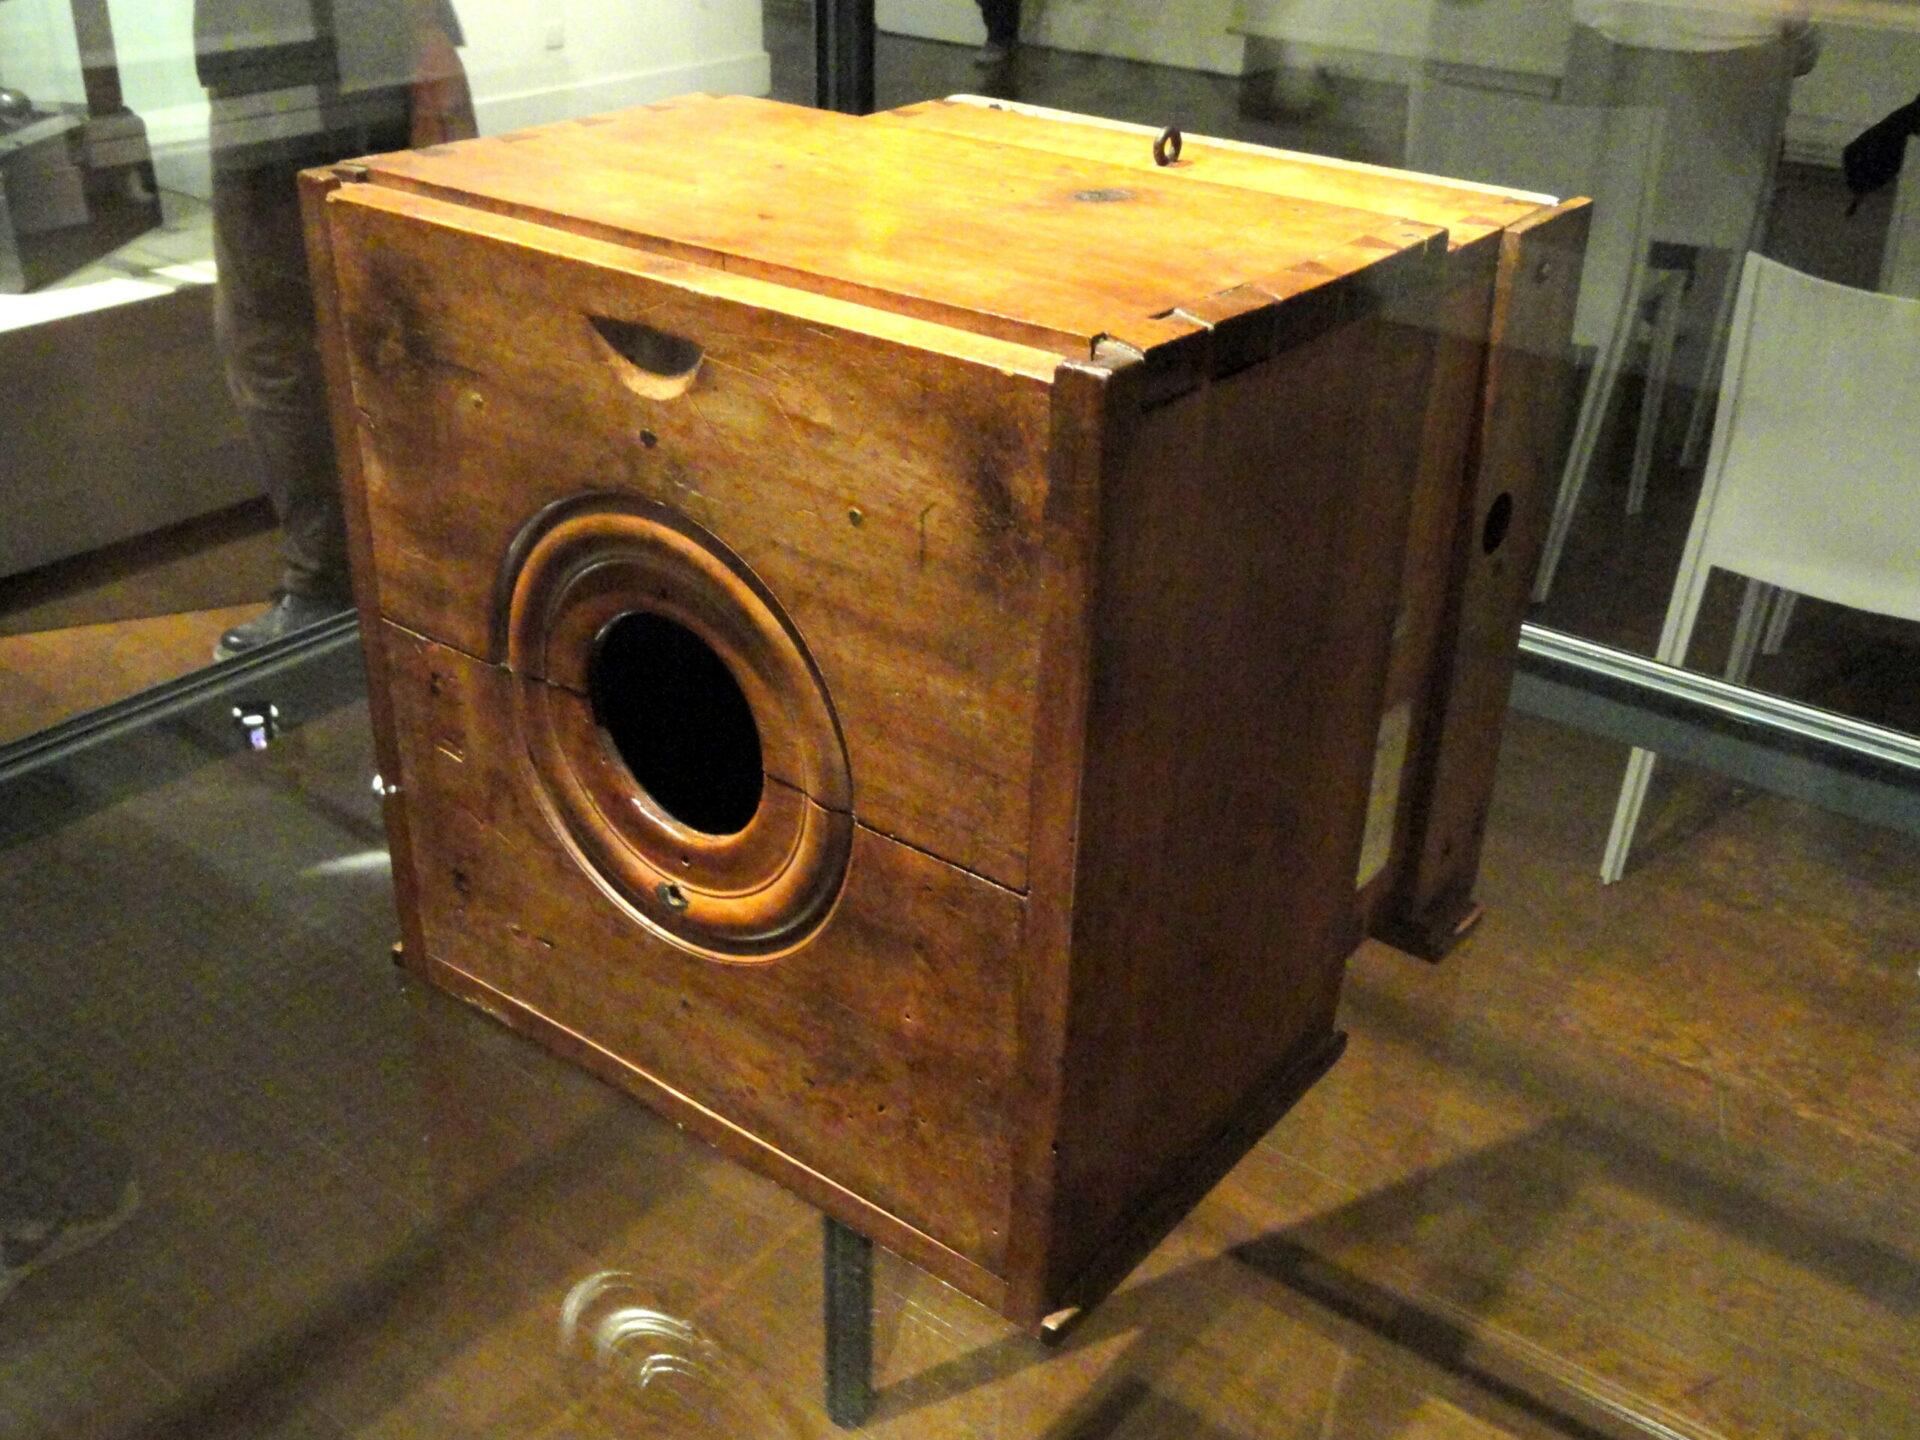 The first camera prototype invented by Nicéphore Niépce.